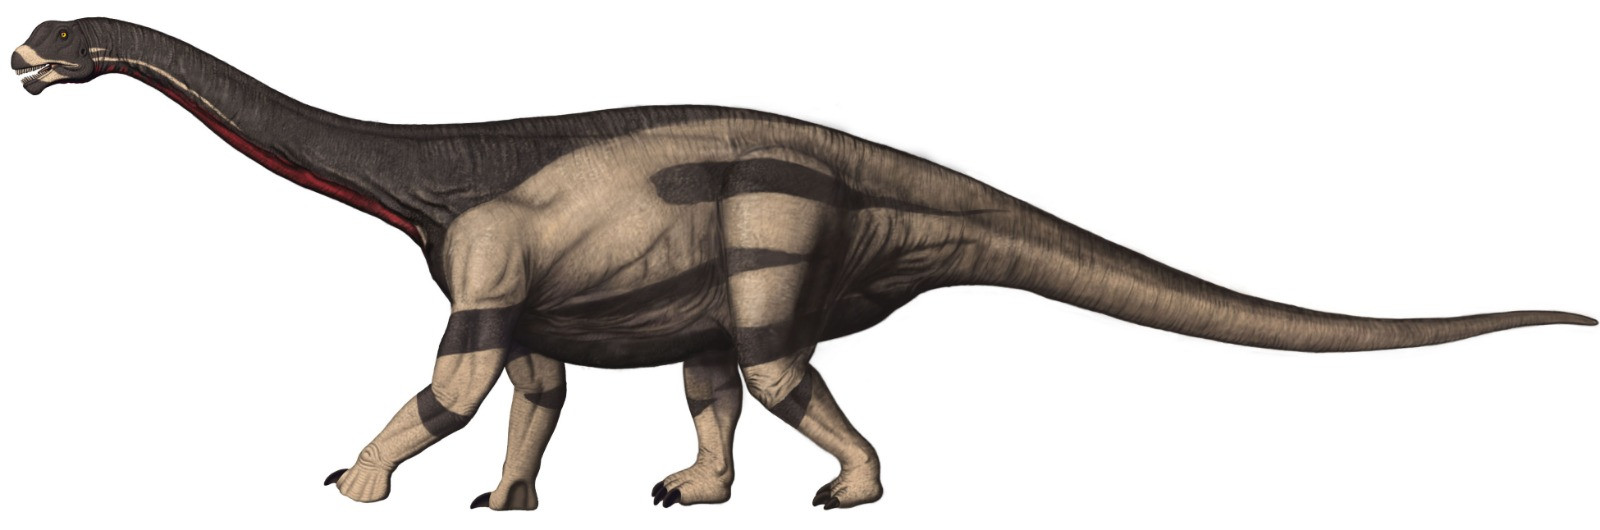 Camarasaurus is identical to Barosaurus with the exception of a shorter neck and tail. Could a small